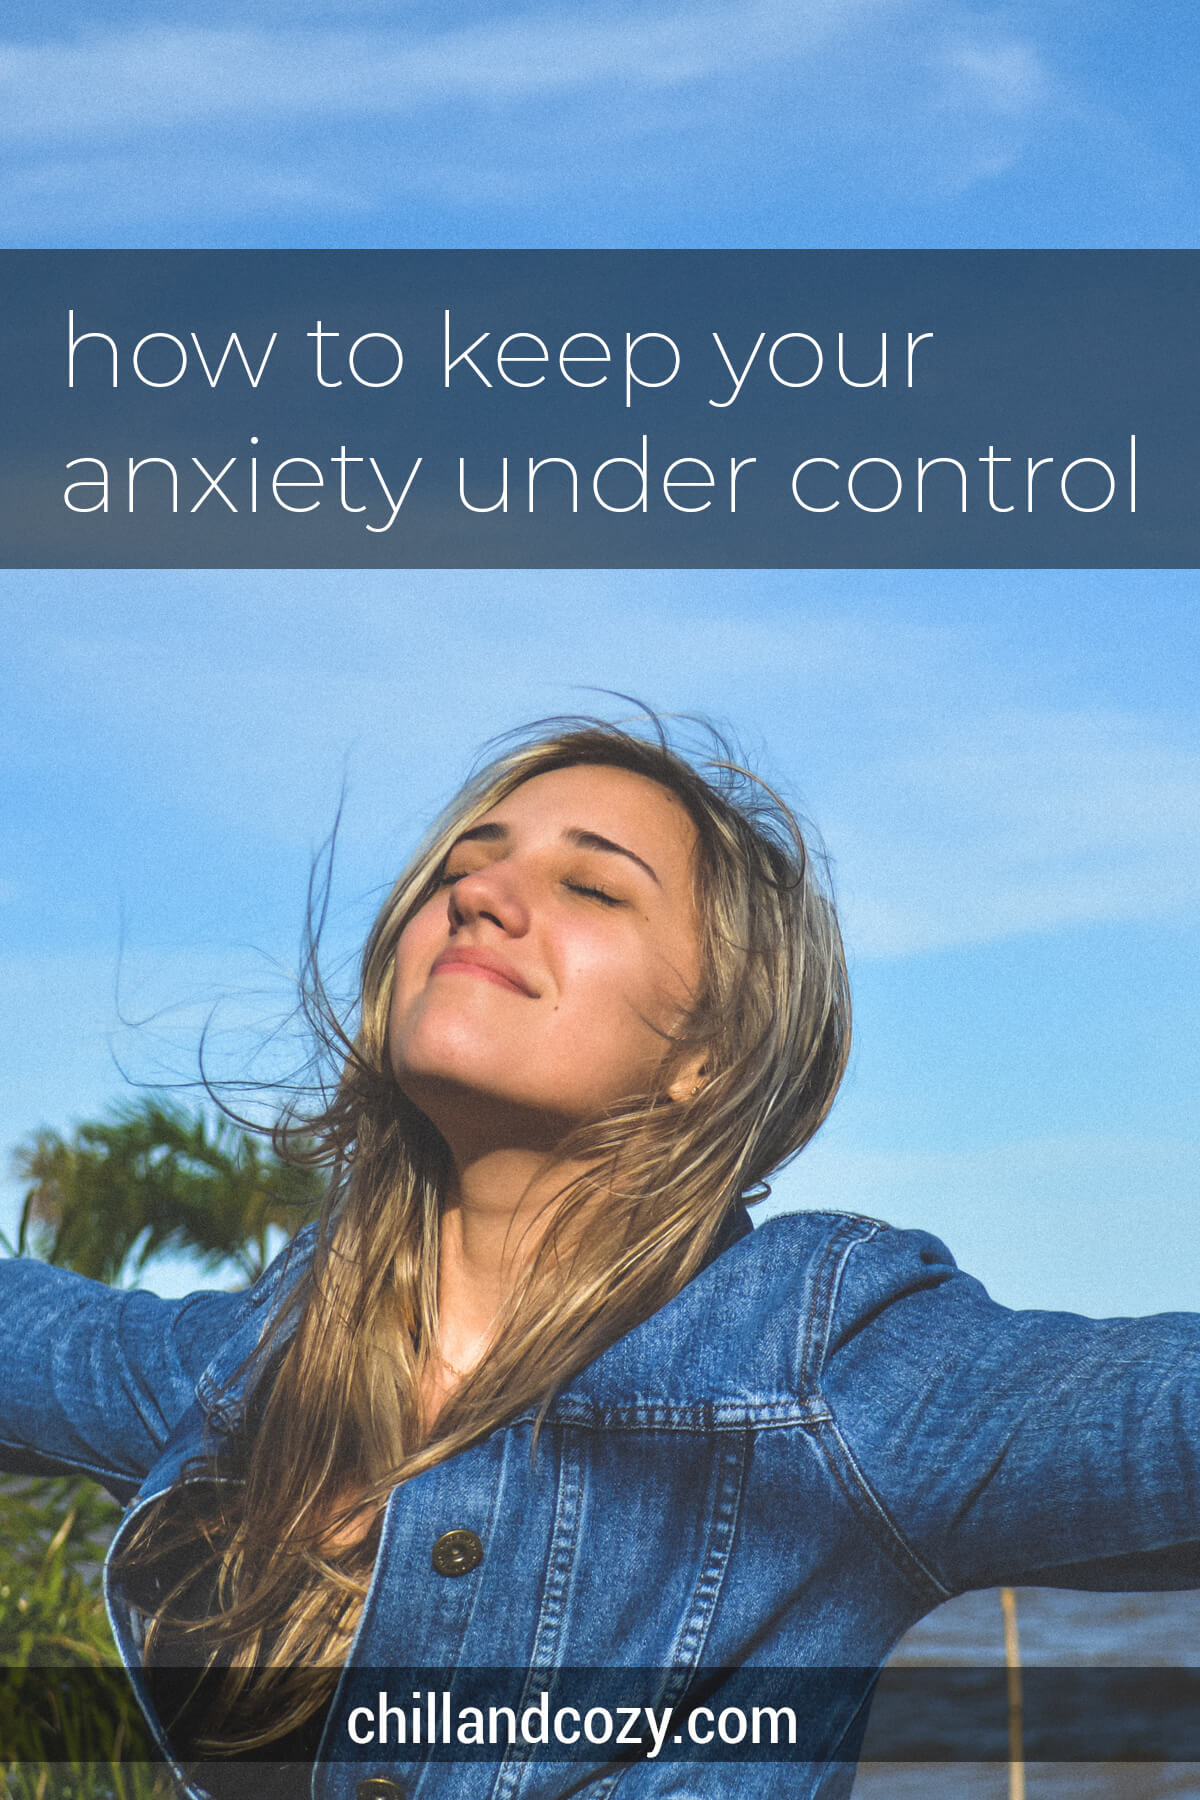 11 Ways to Keep Your Anxiety Under Control